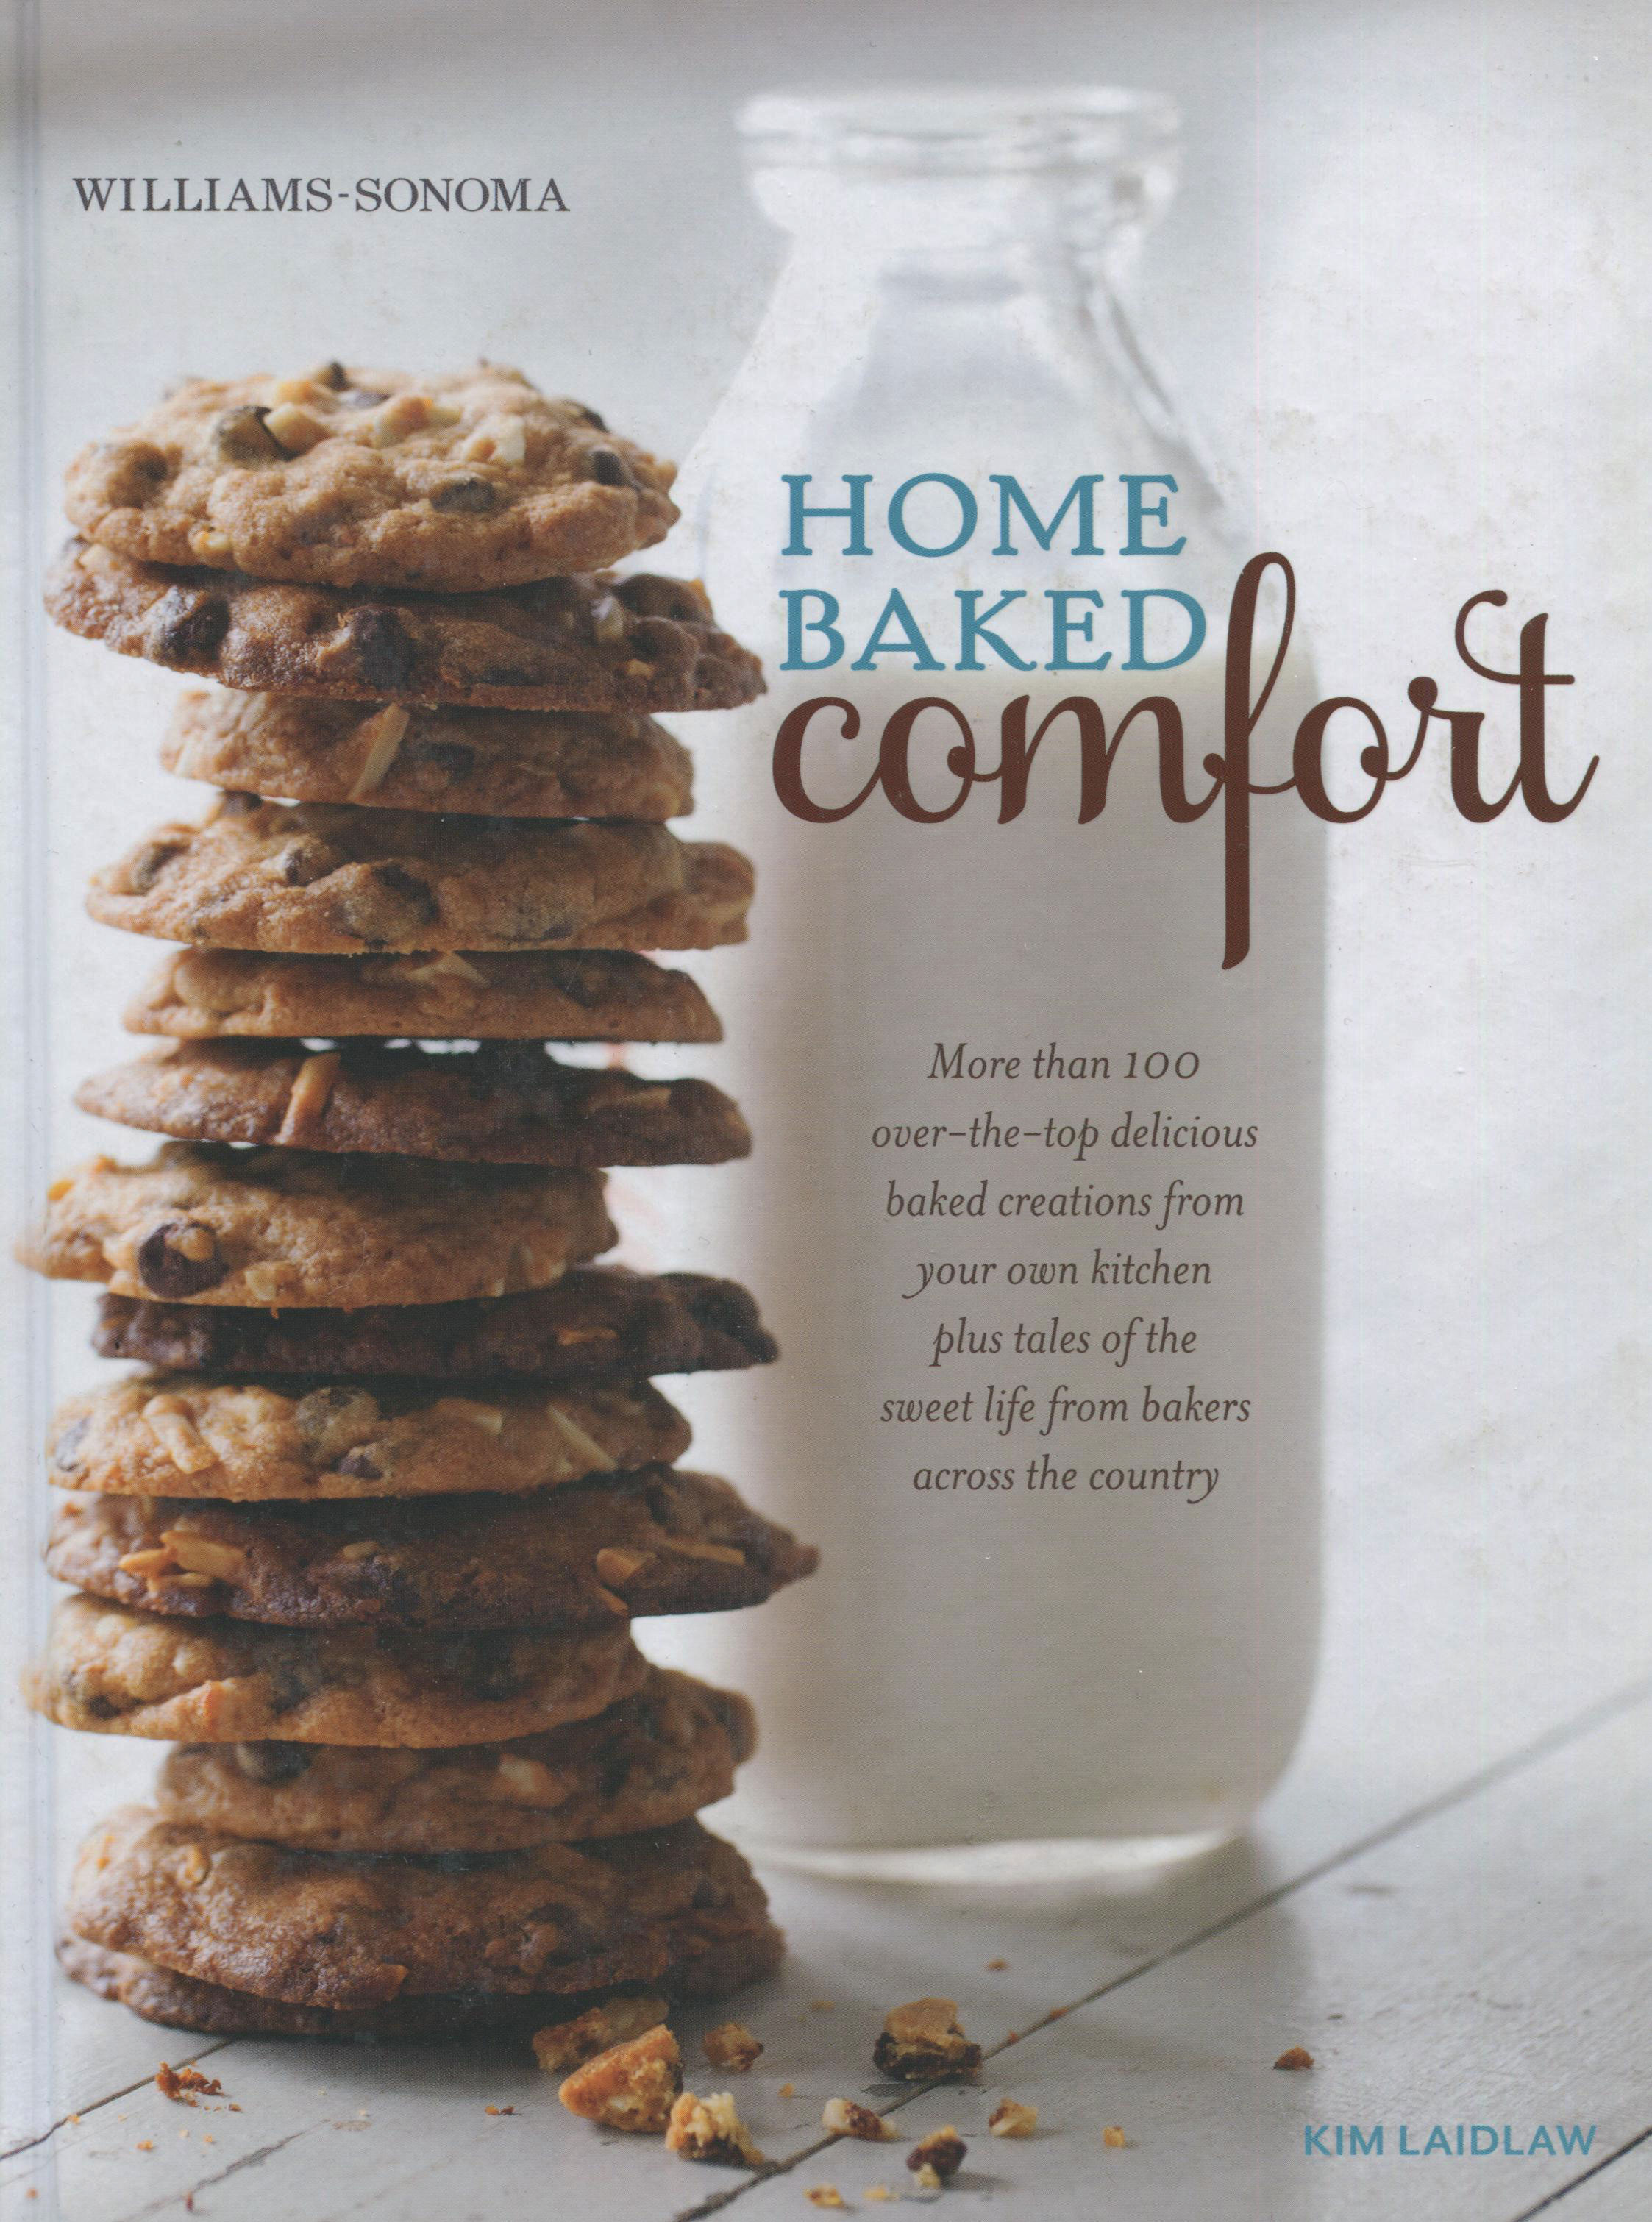 TBT Cookbook Review: Home Baked Comfort by Kim Laidlaw from Williams-Sonoma